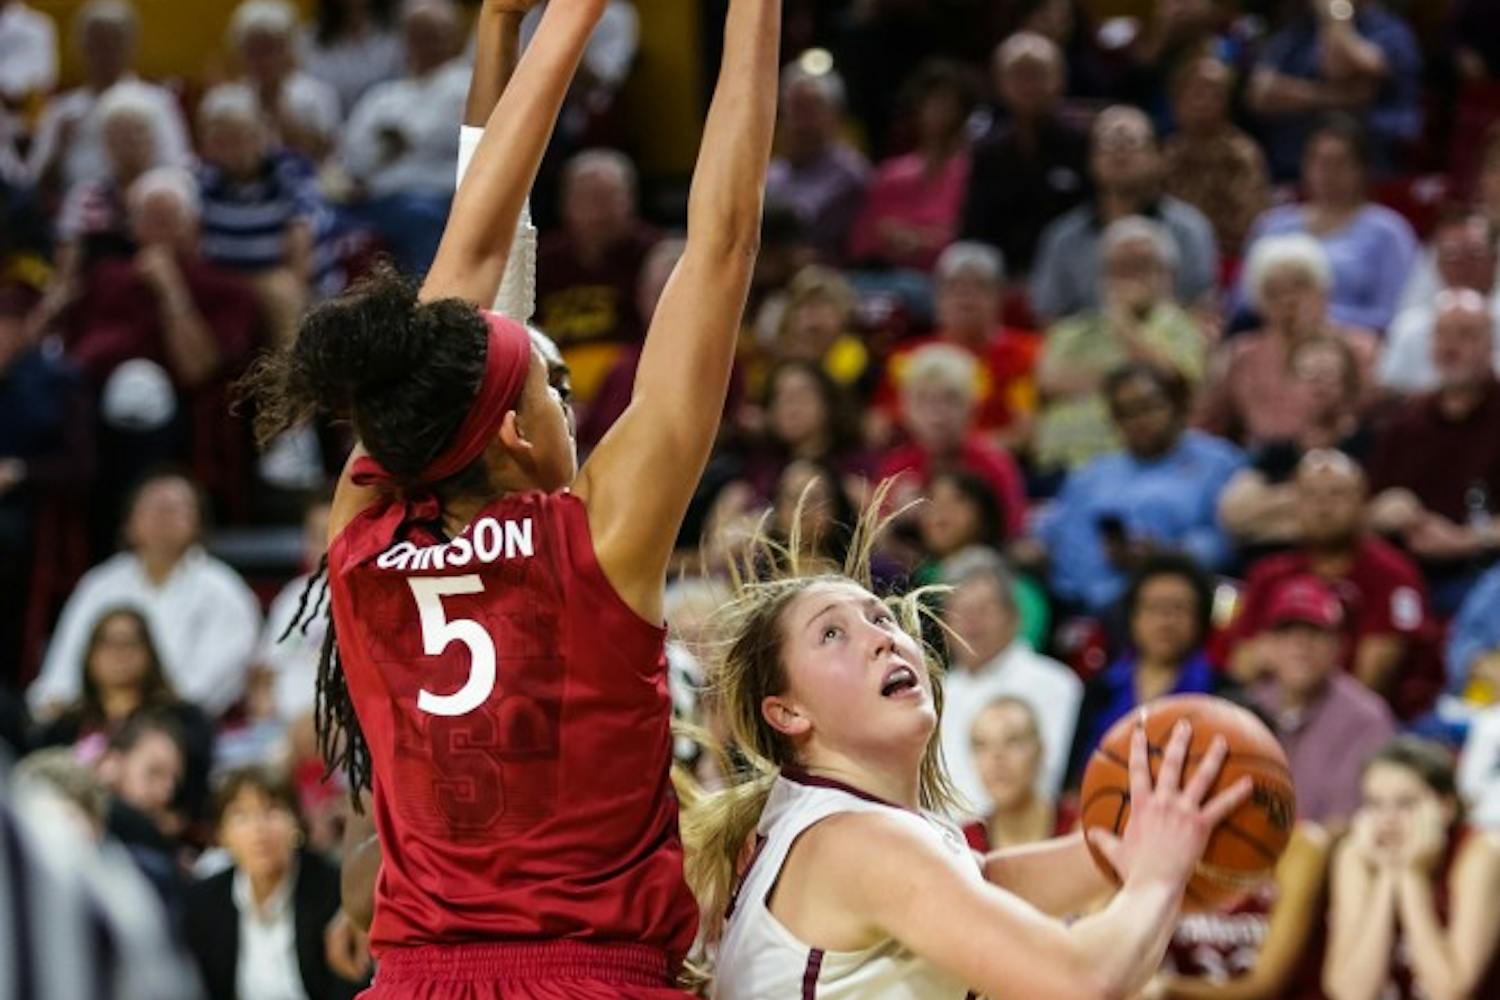 ASU sophomore forward Kelsey Moos looks for a shot as Stanford freshman forward Kaylee Johnson closes during the ASU vs. Stanford women’s basketball game on Feb. 6, 2015, at the Wells Fargo Arena. (Daniel Kwon/The State Press)